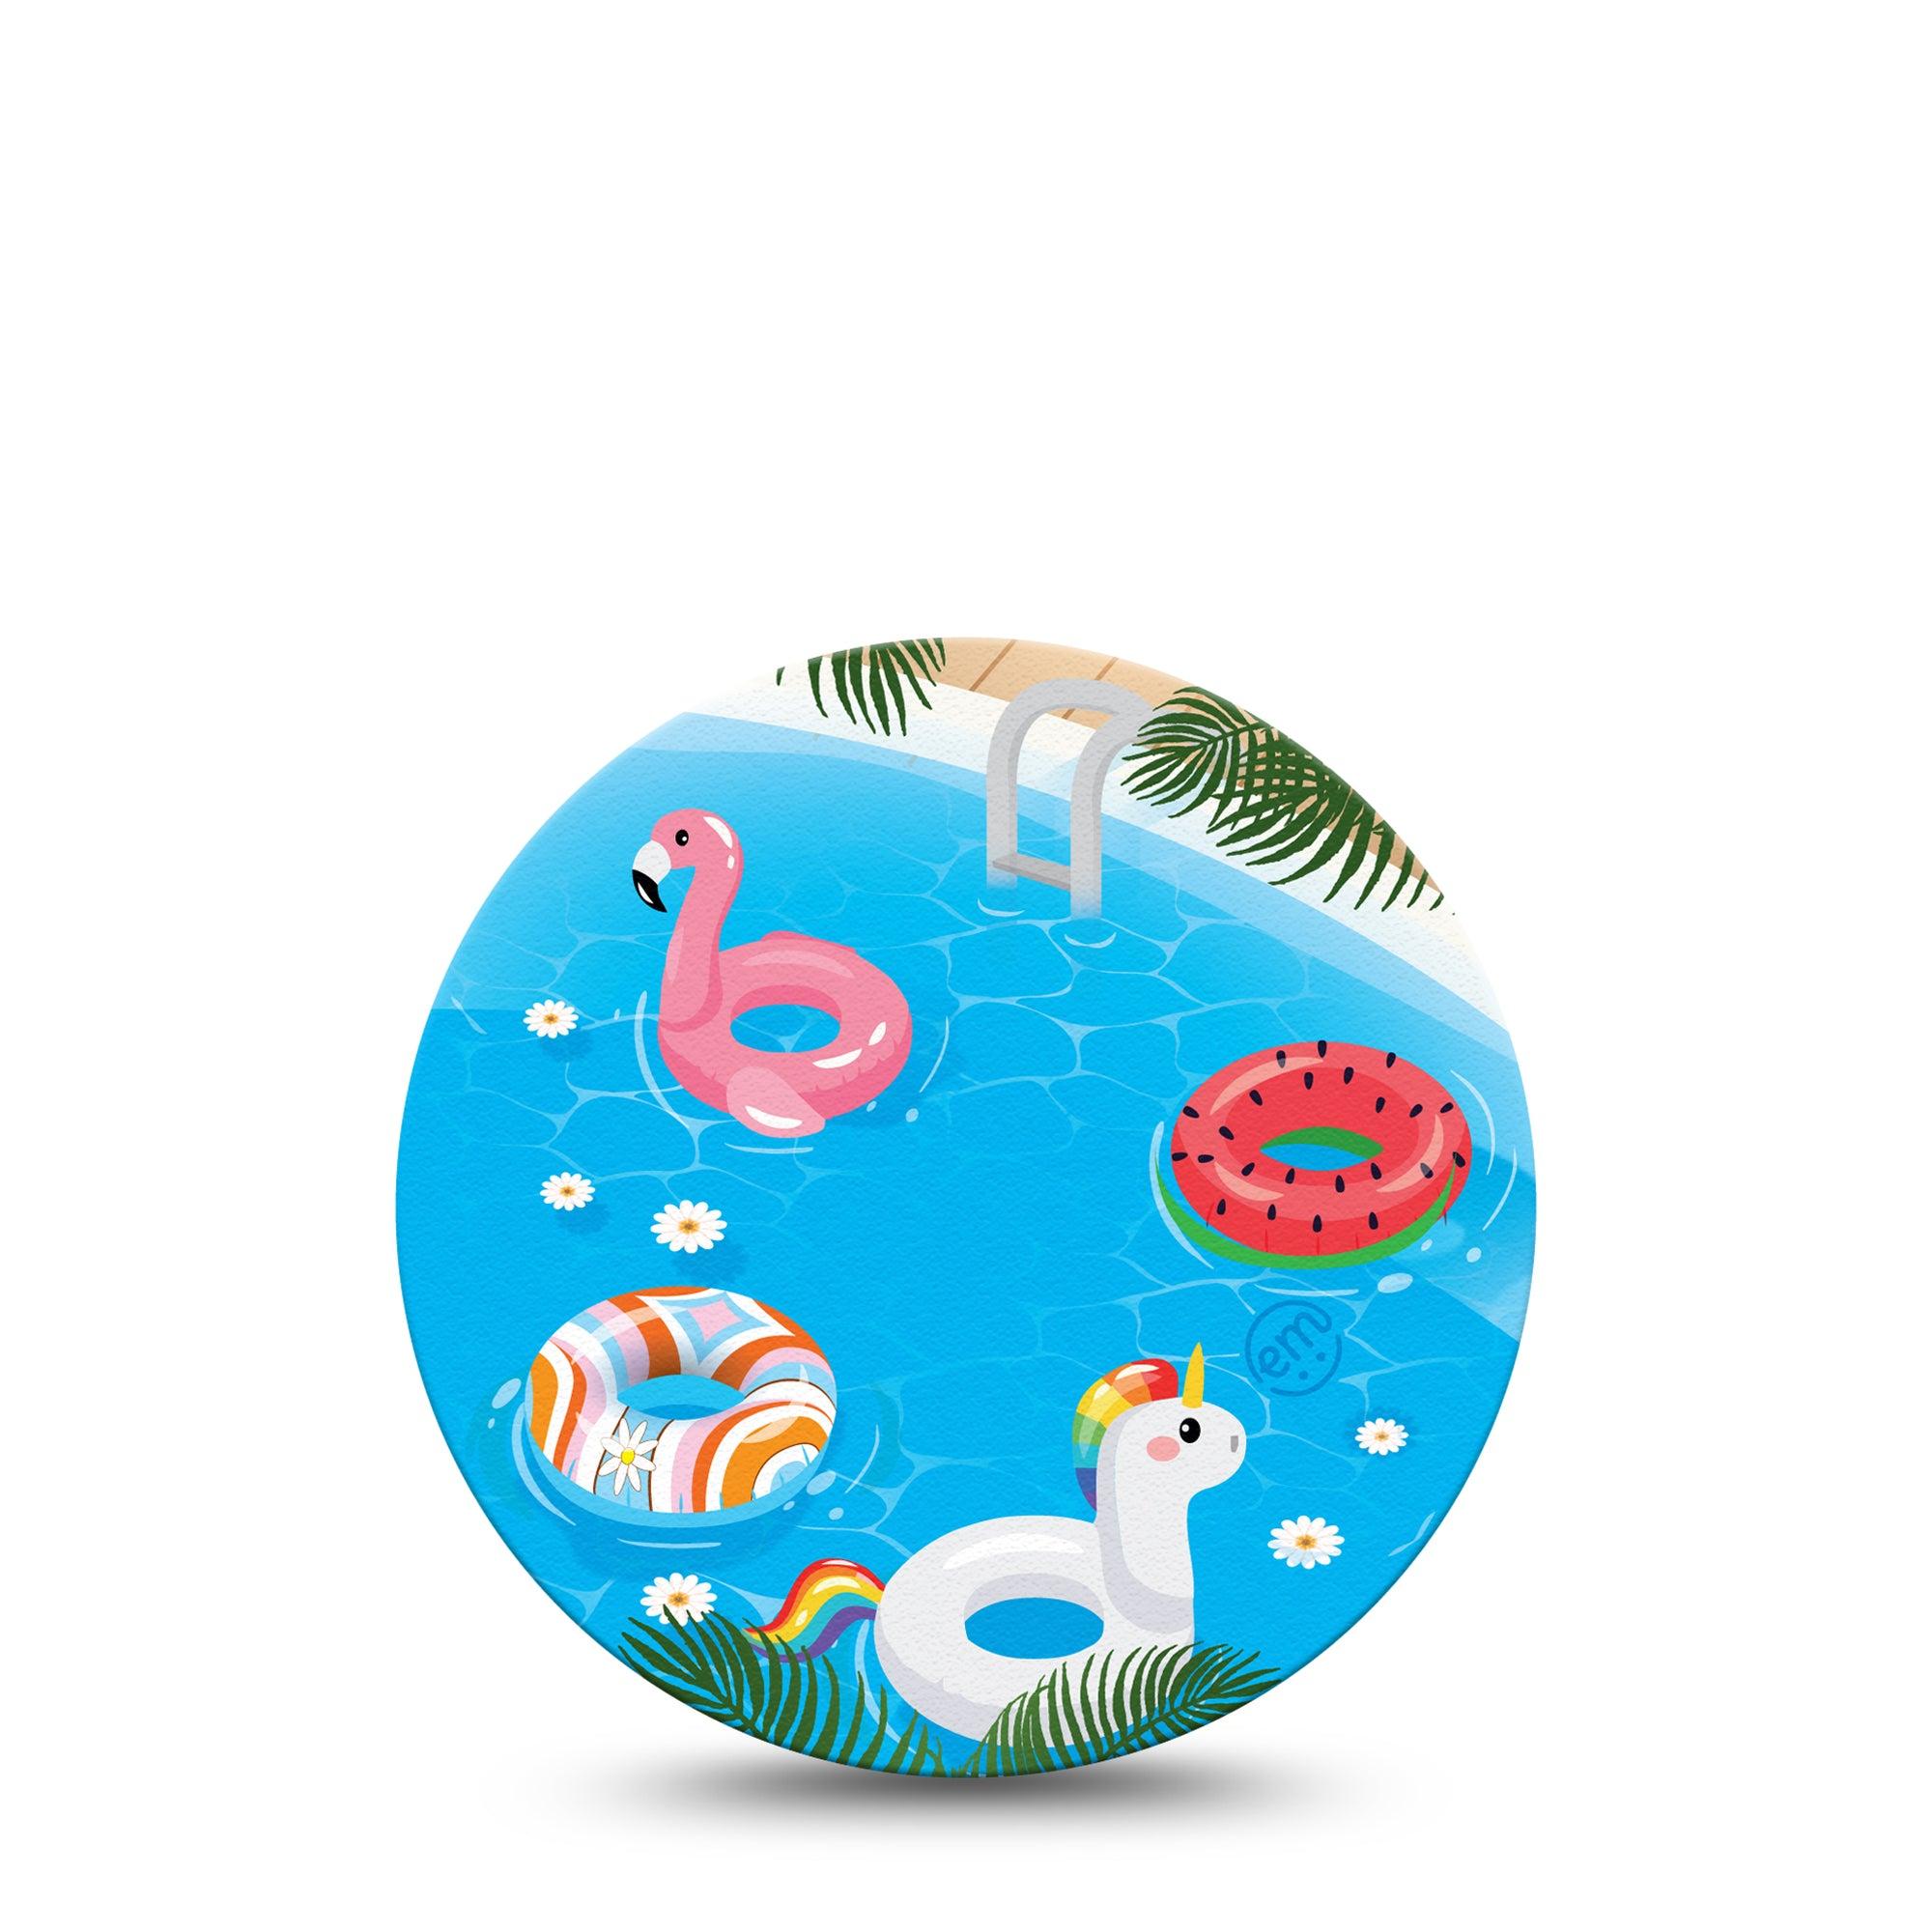 ExpressionMed Summer Pool Libre 2 Overpatch, Single, Relaxing Swim Inspired, CGM Adhesive Tape Design